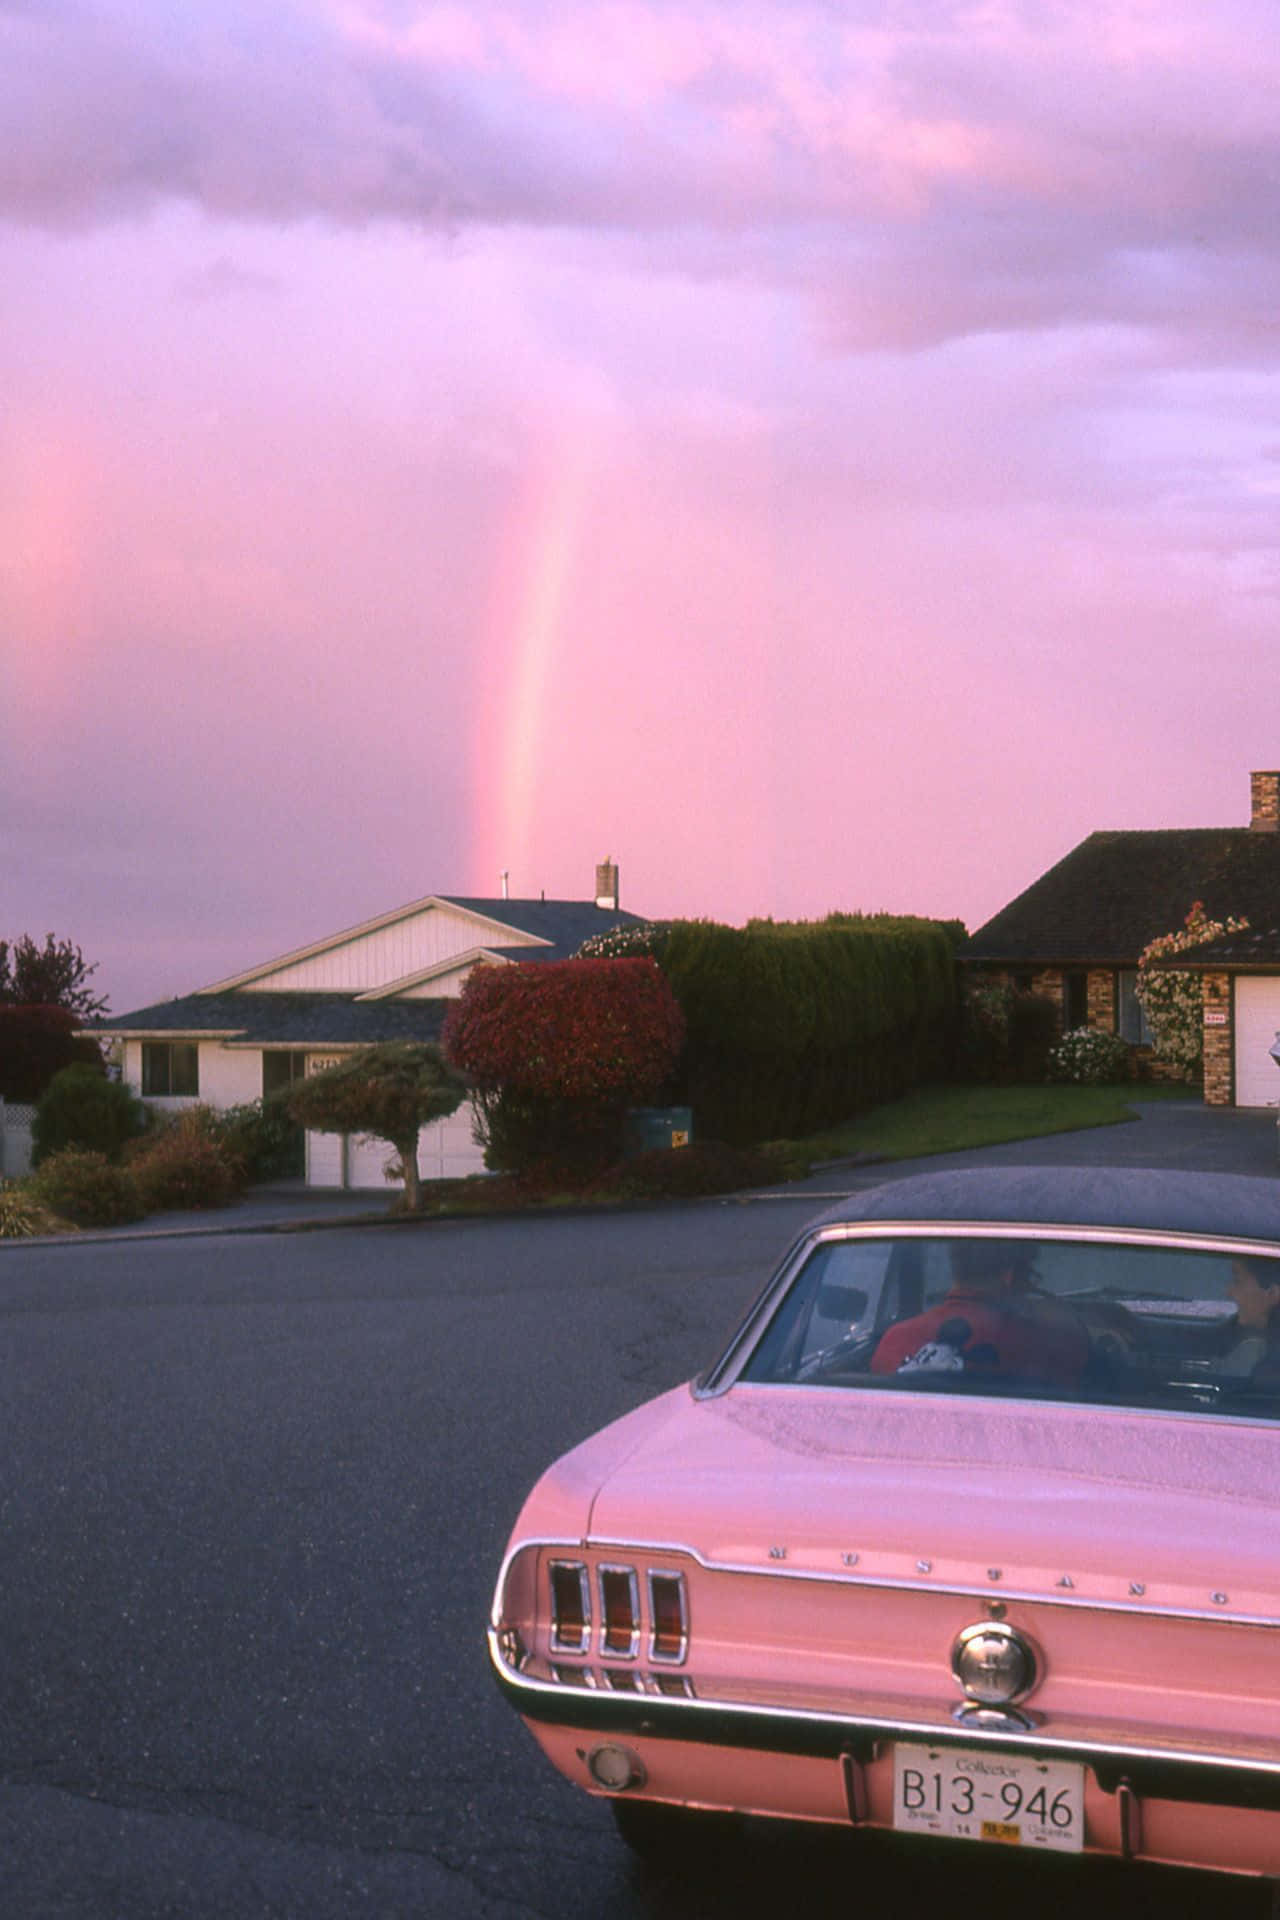 90s Aesthetic Pink Ford Mustang Car Wallpaper